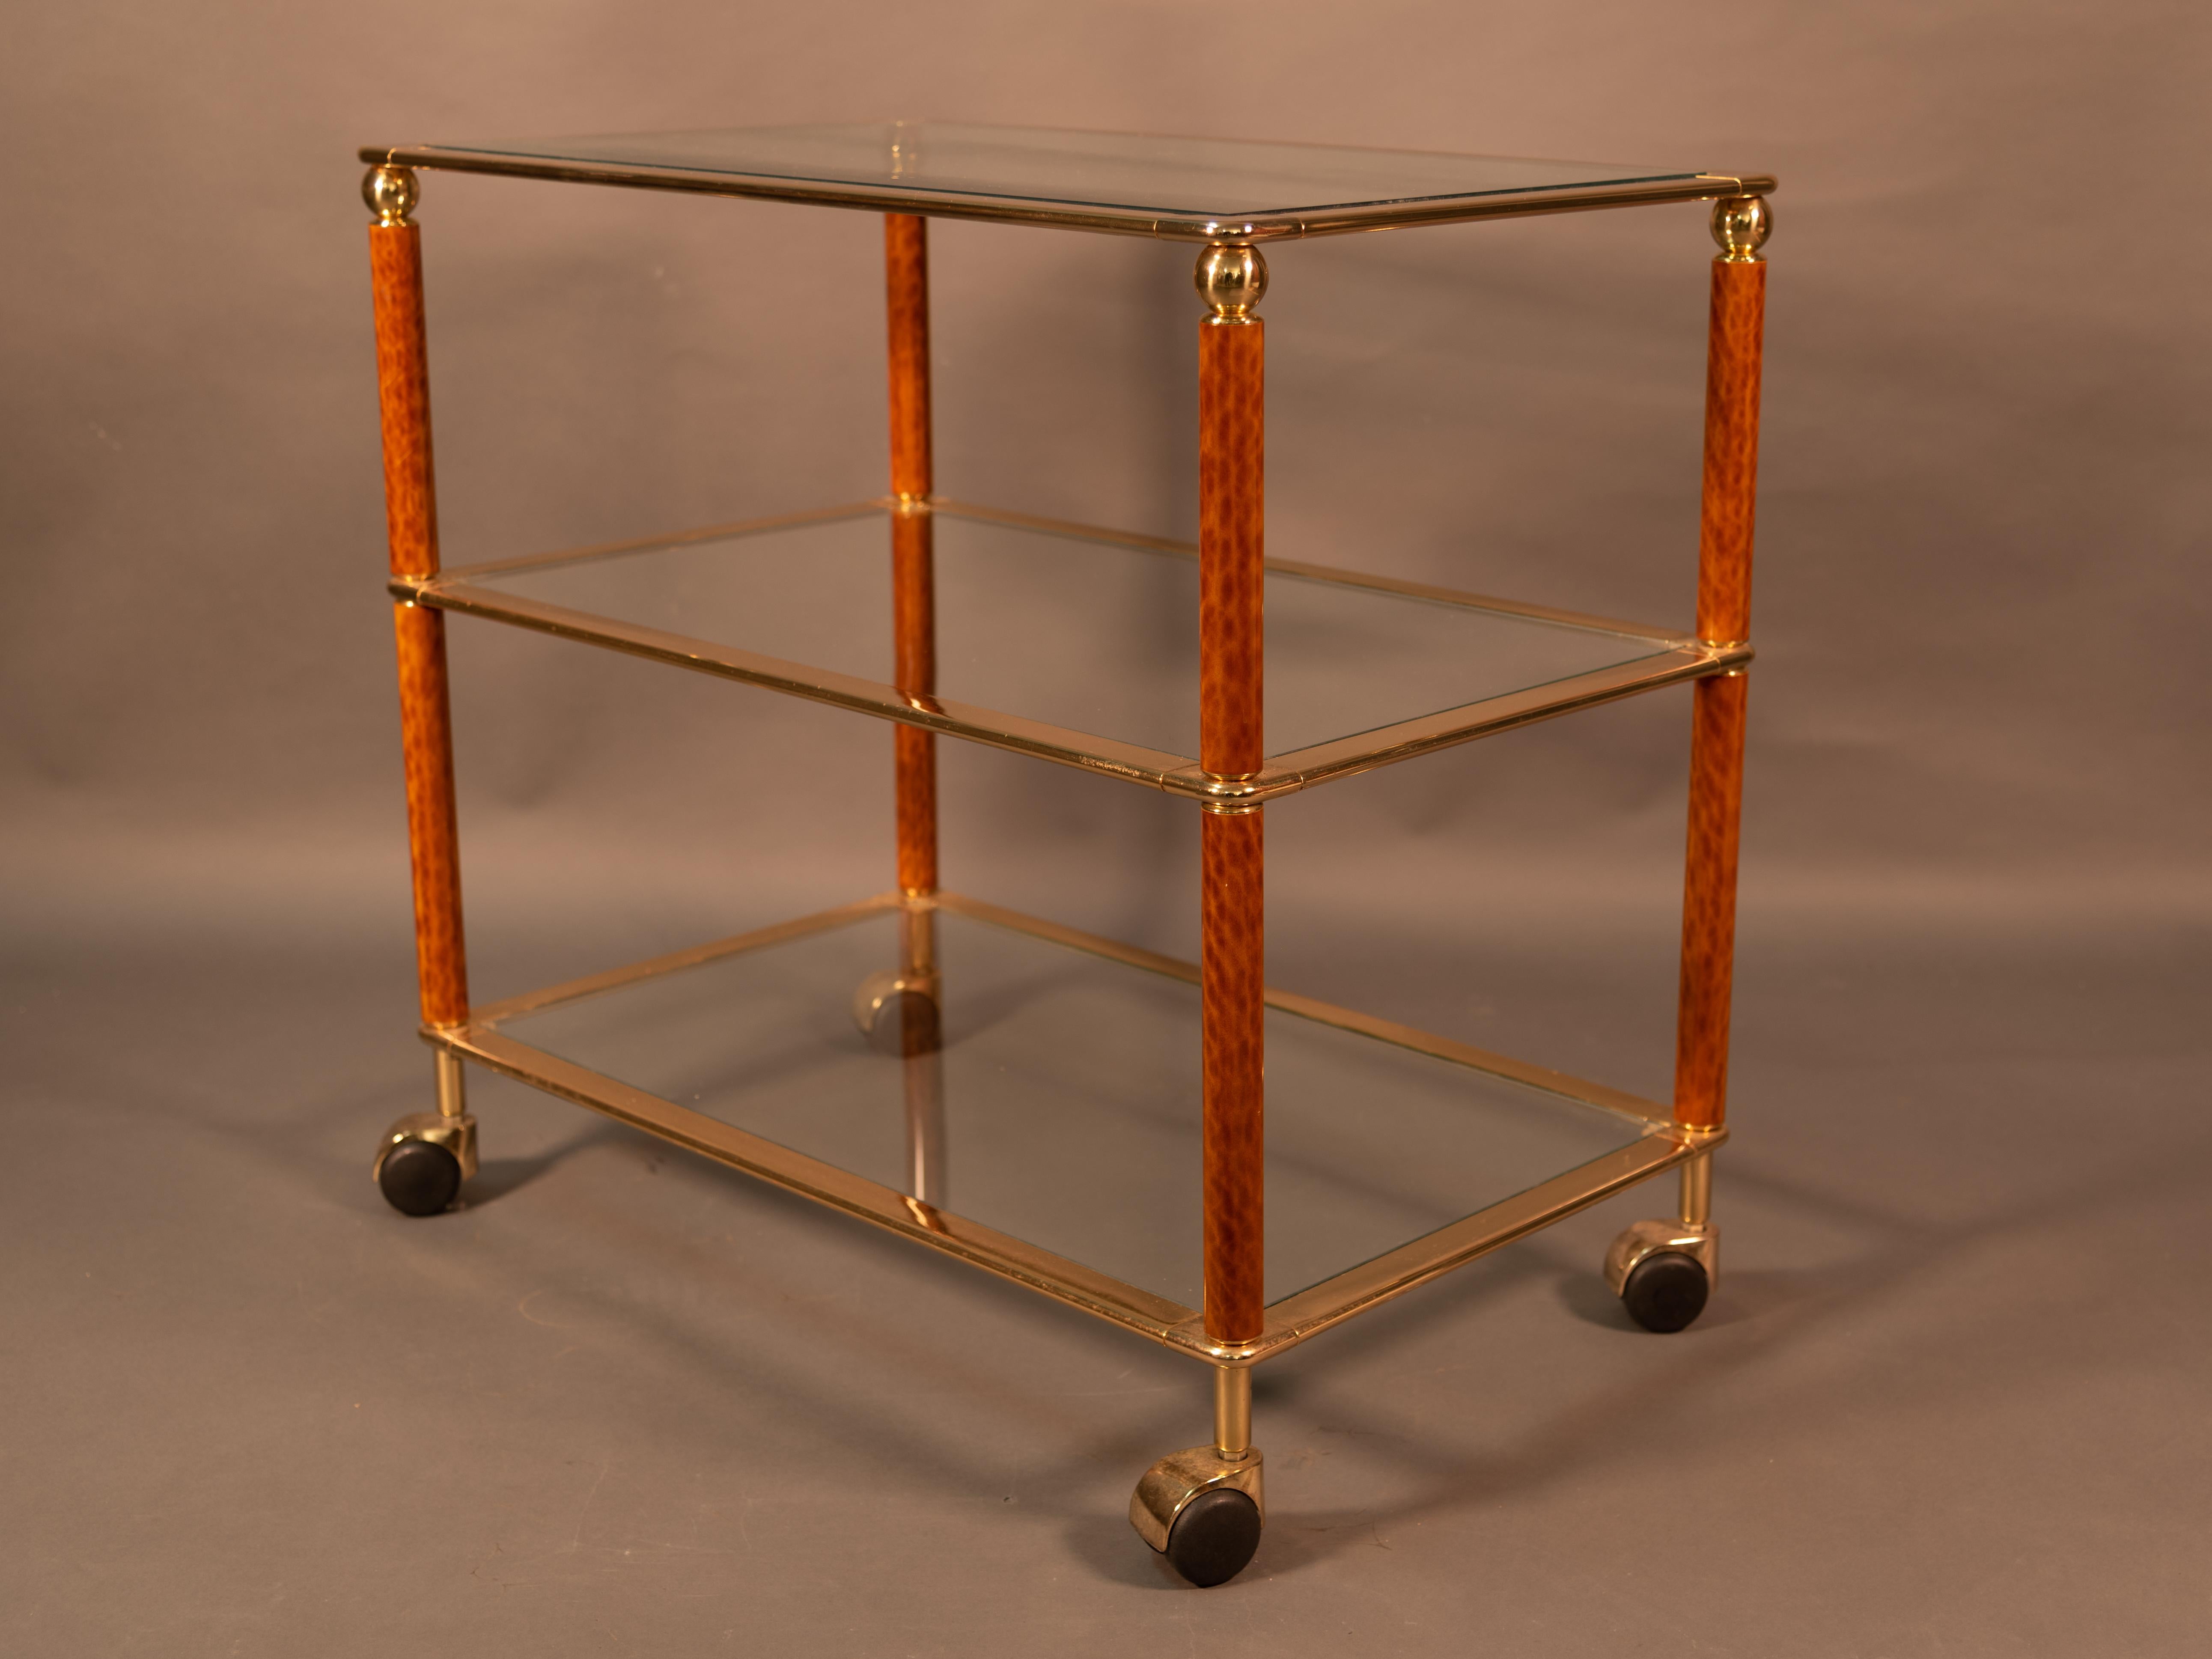 For your consideration is an very nice handsome two-tiered midcentury drinks cart or bar cart trolley.
In the style of Willy Rizzo featuring a rectangular guilted brass frame with burled wood structure, set upon four rolling casters.
 In excellent